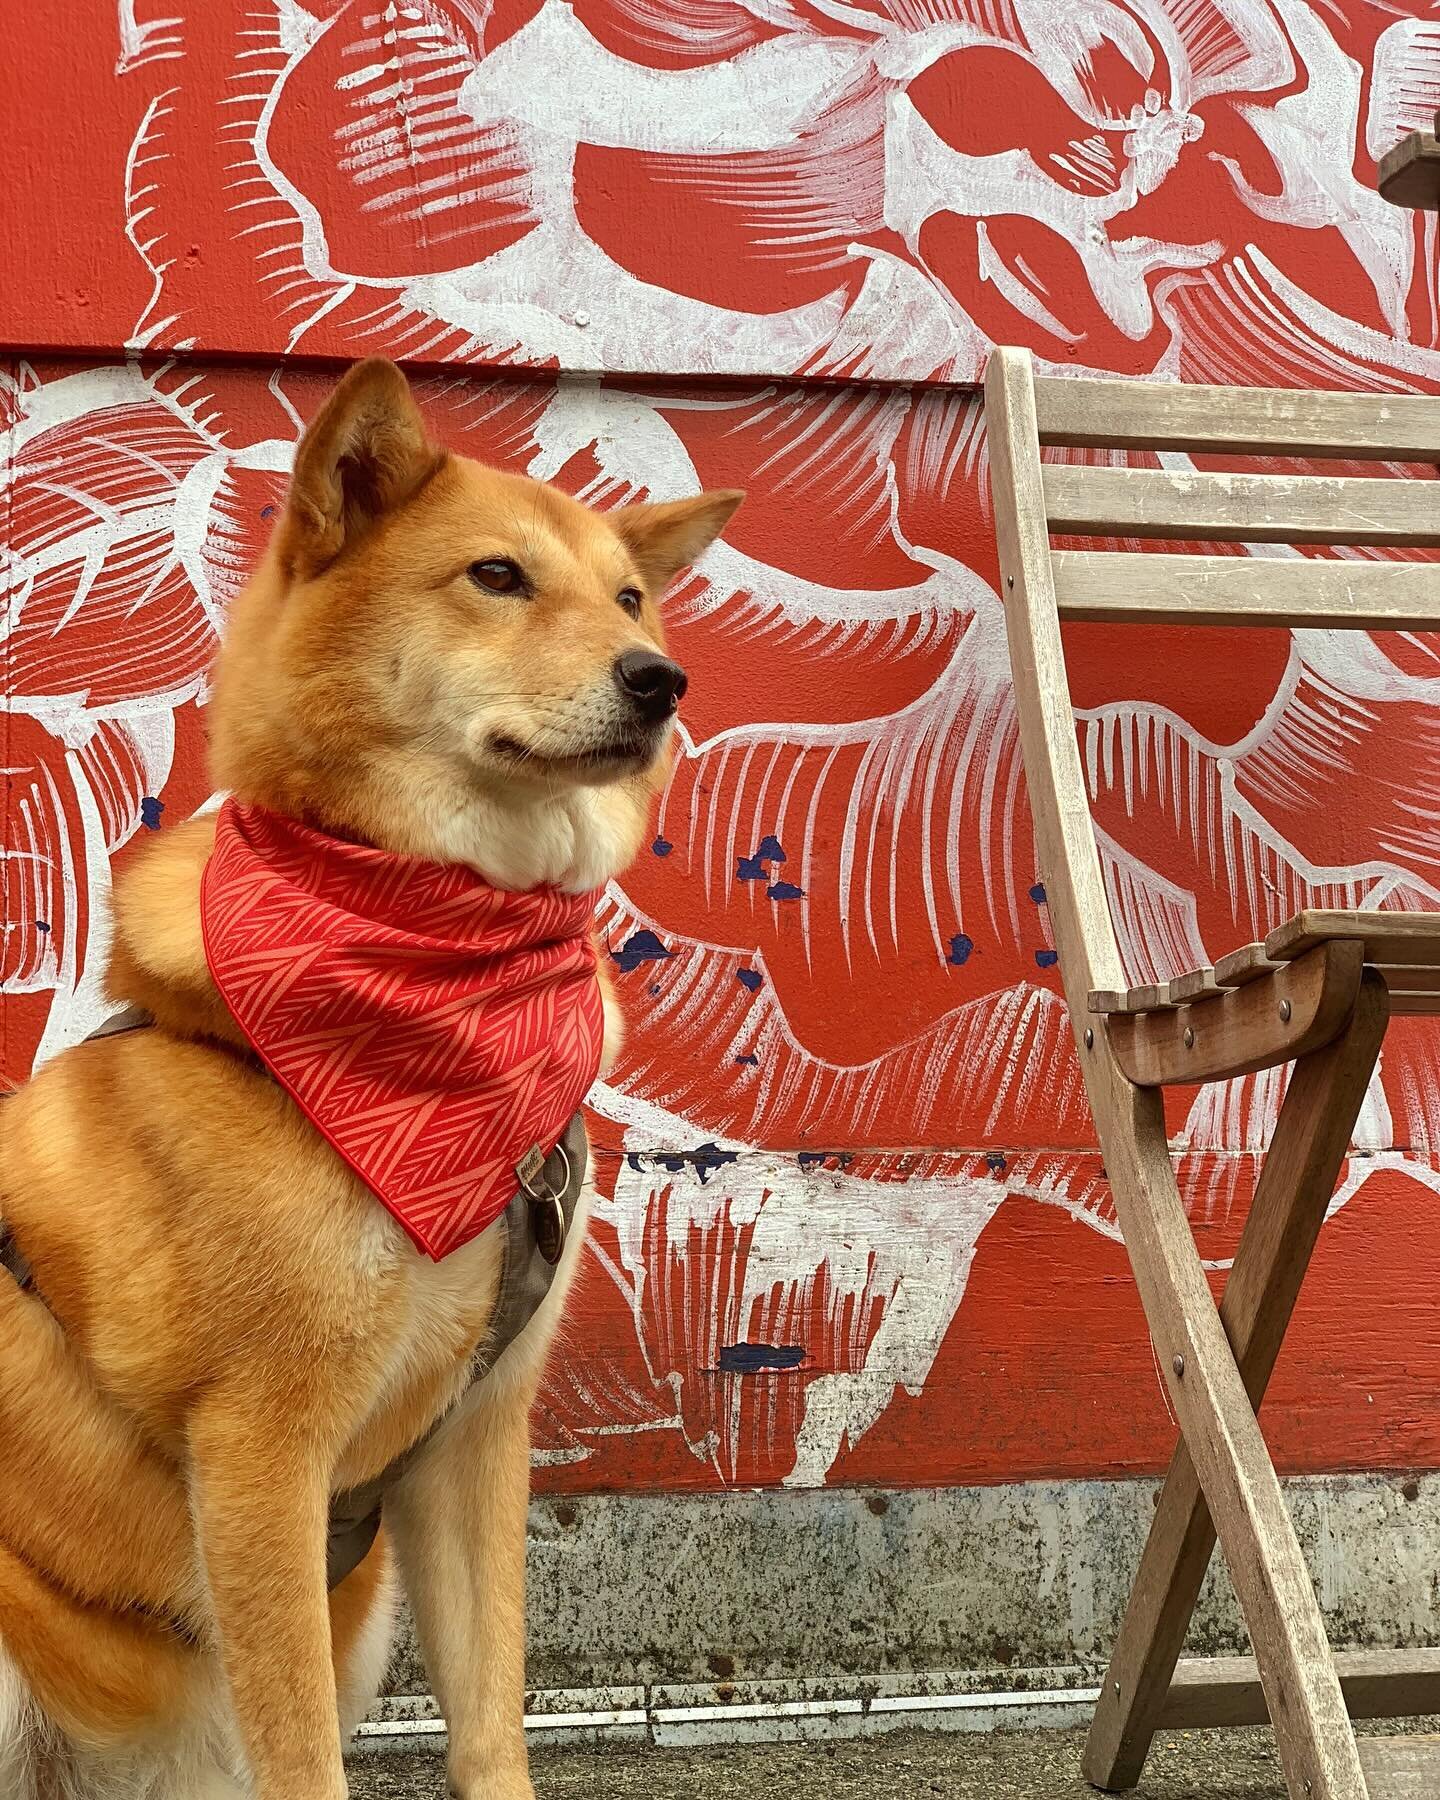 Happy Lunar New Year! 
We wish you prosperity and good fortune in the year of the dragon! 🧧 
&hellip;
ootd: Lore bandana from @muttcloth 
#adventureswithdogs #happylunarnewyear